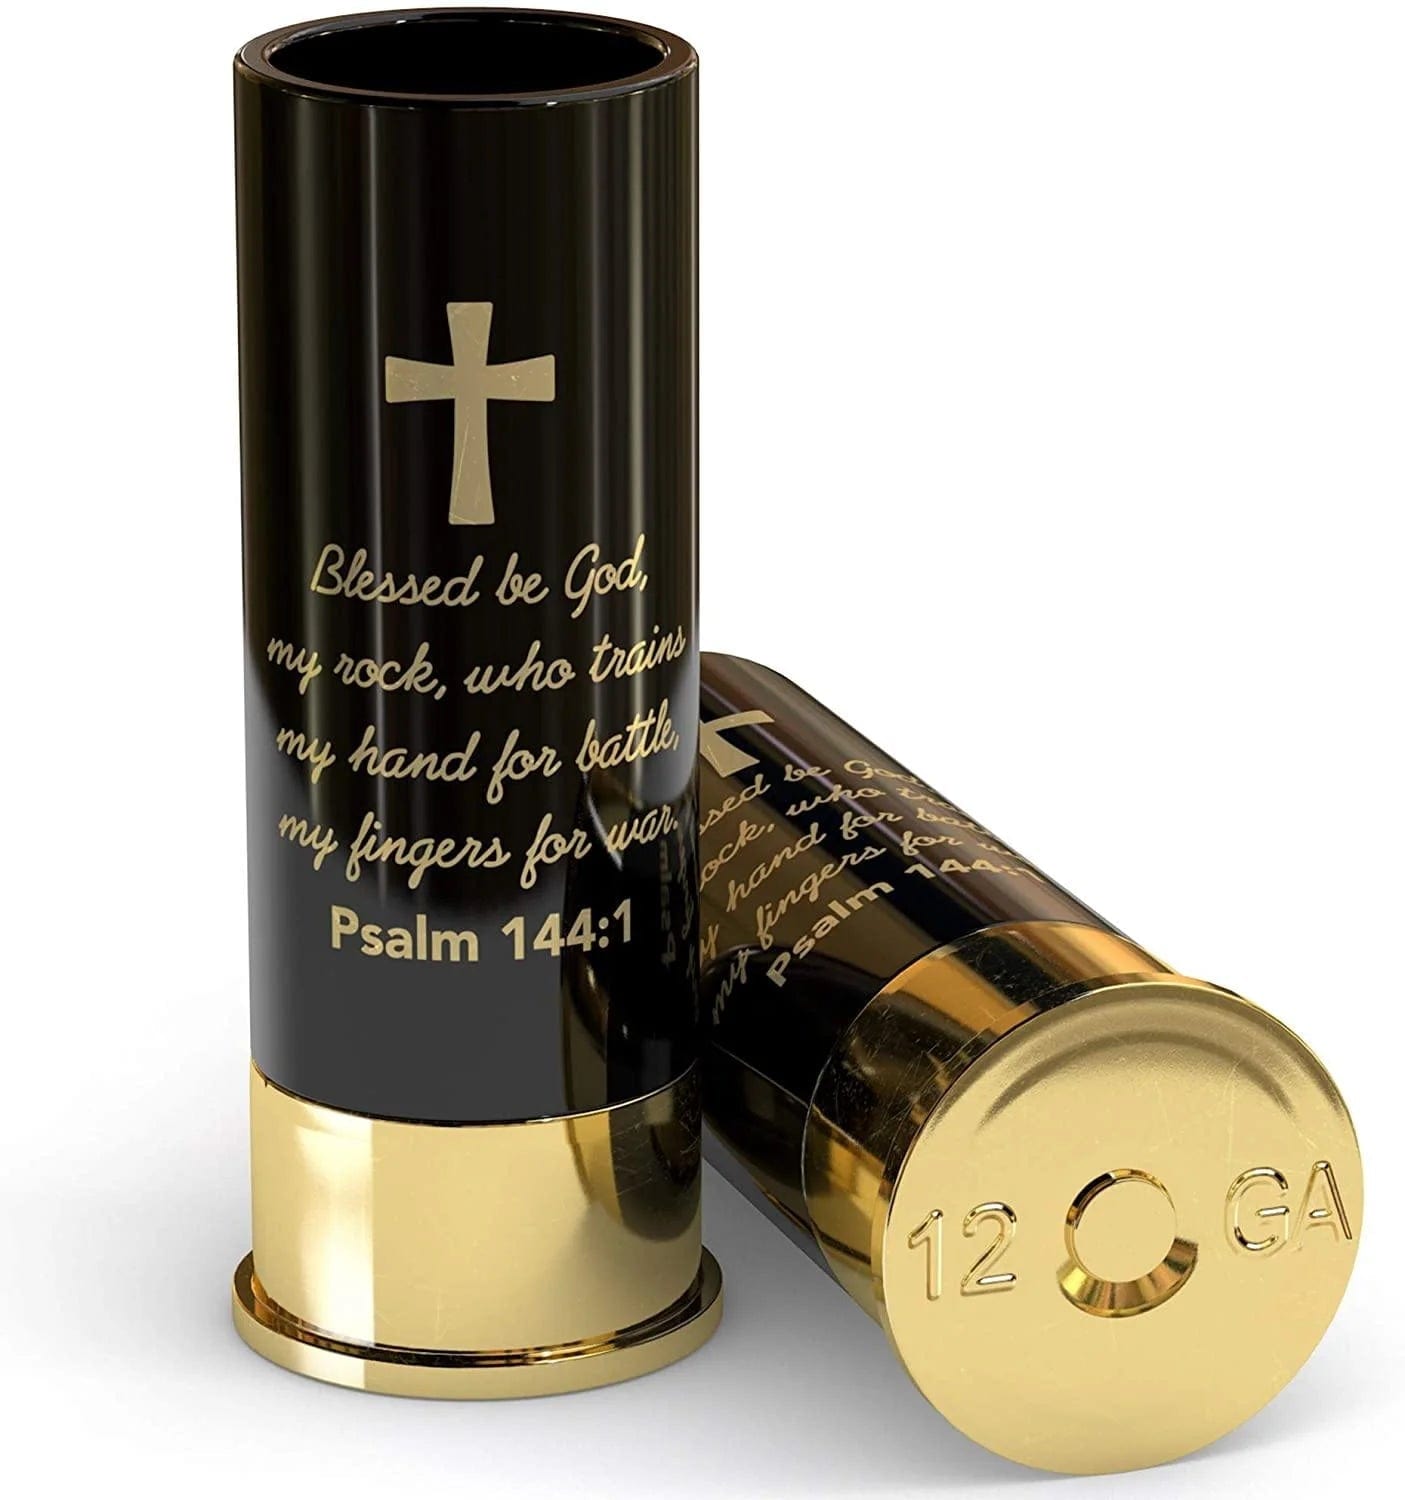 12 Gauge Shot Glasses Boxed Set of 4 Psalm 144:1 - The Whiskey Cave